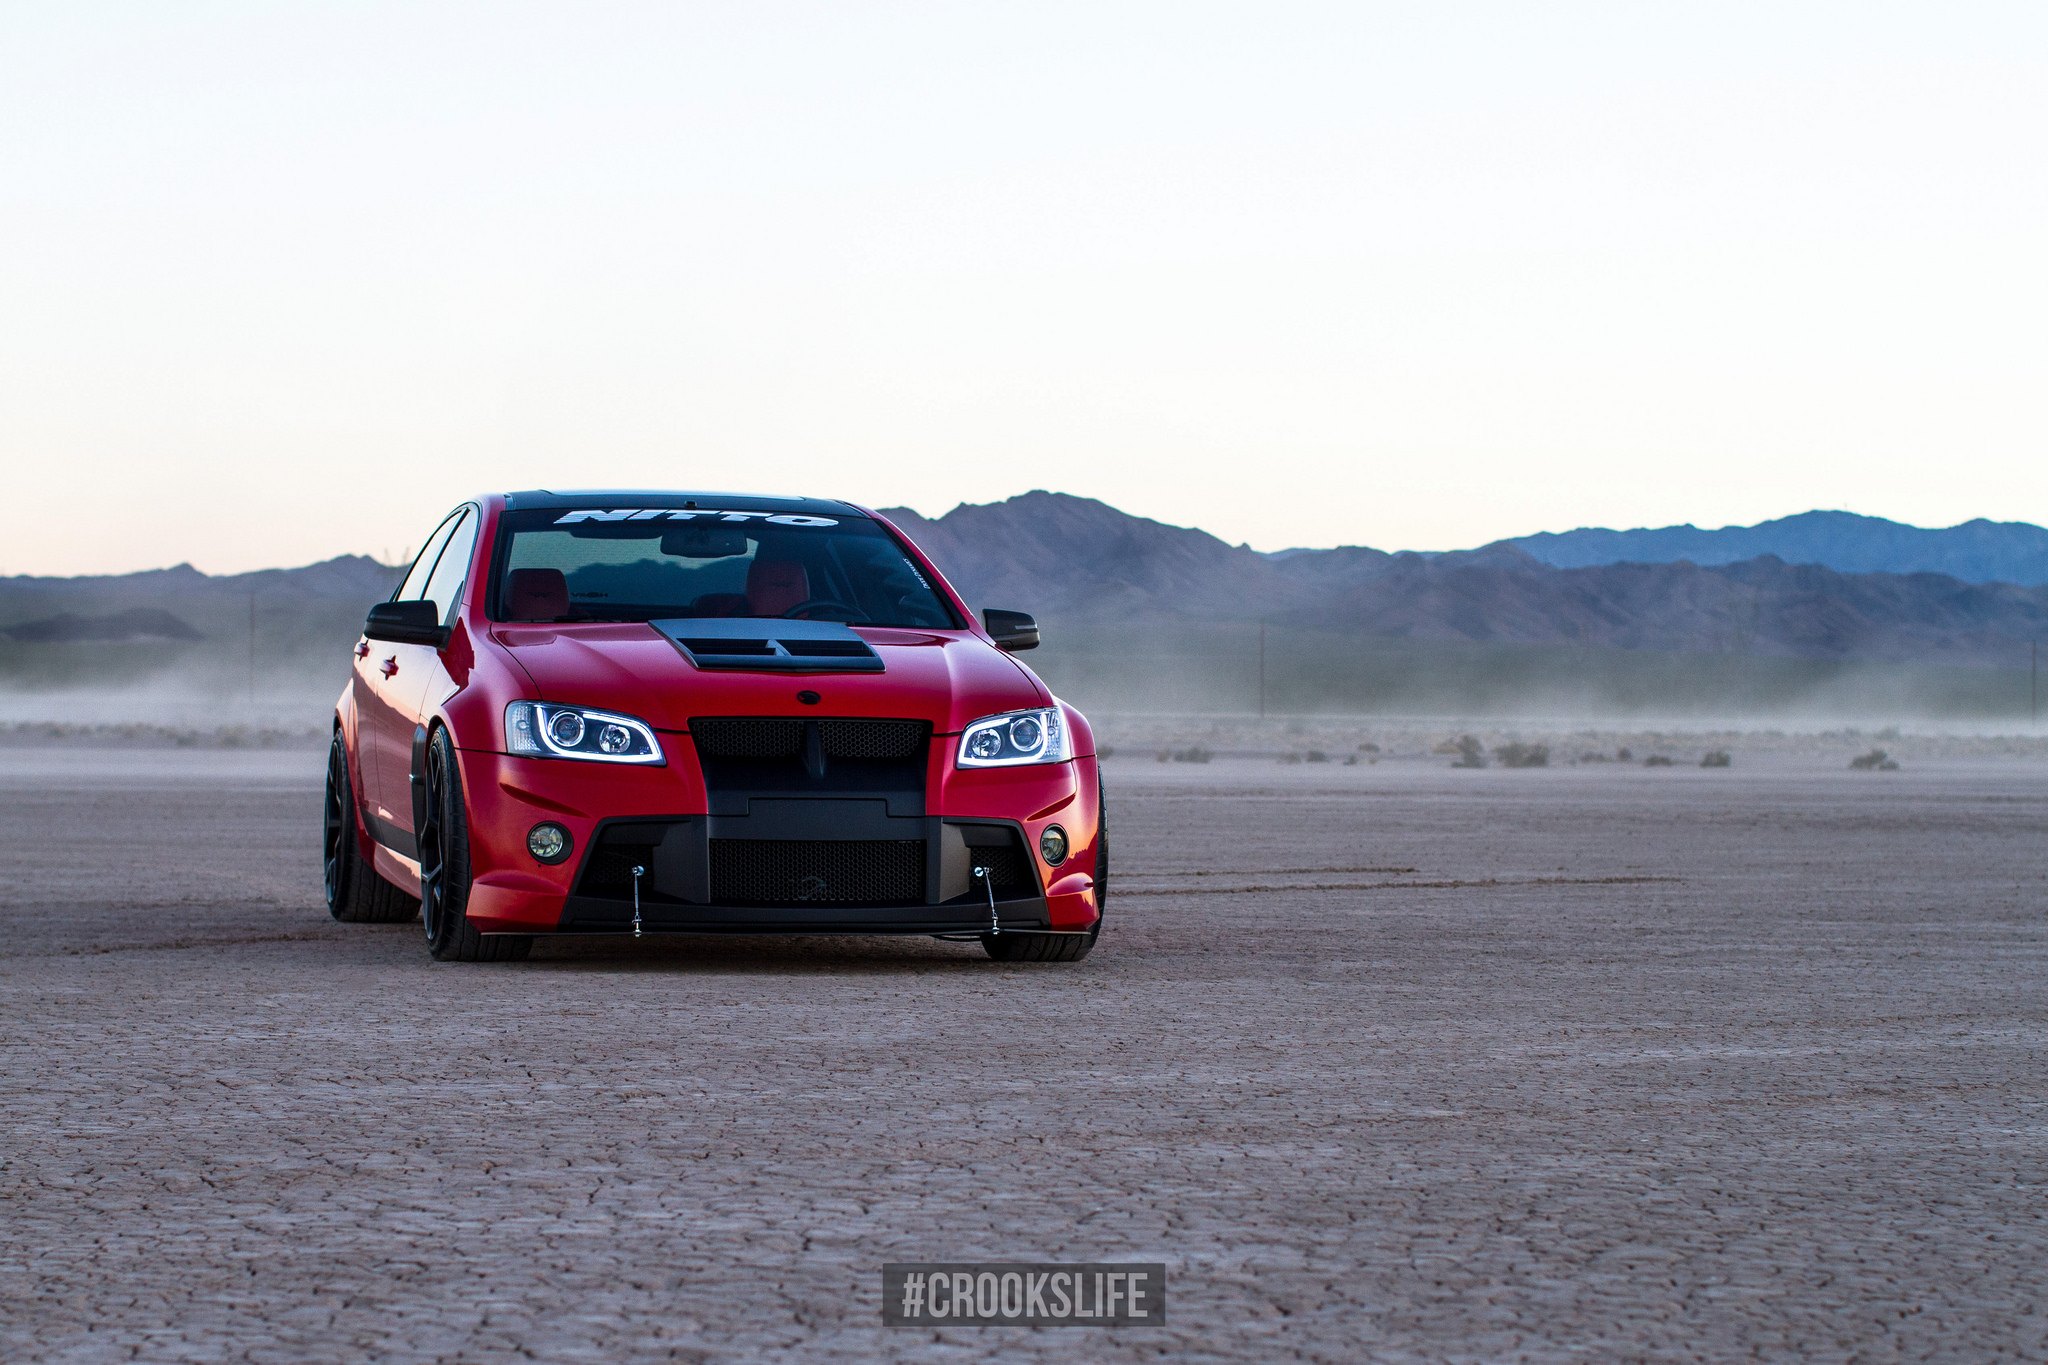 Red Pontiac G8 with Carbon Fiber Front Bumper - Photo by Jimmy Crook